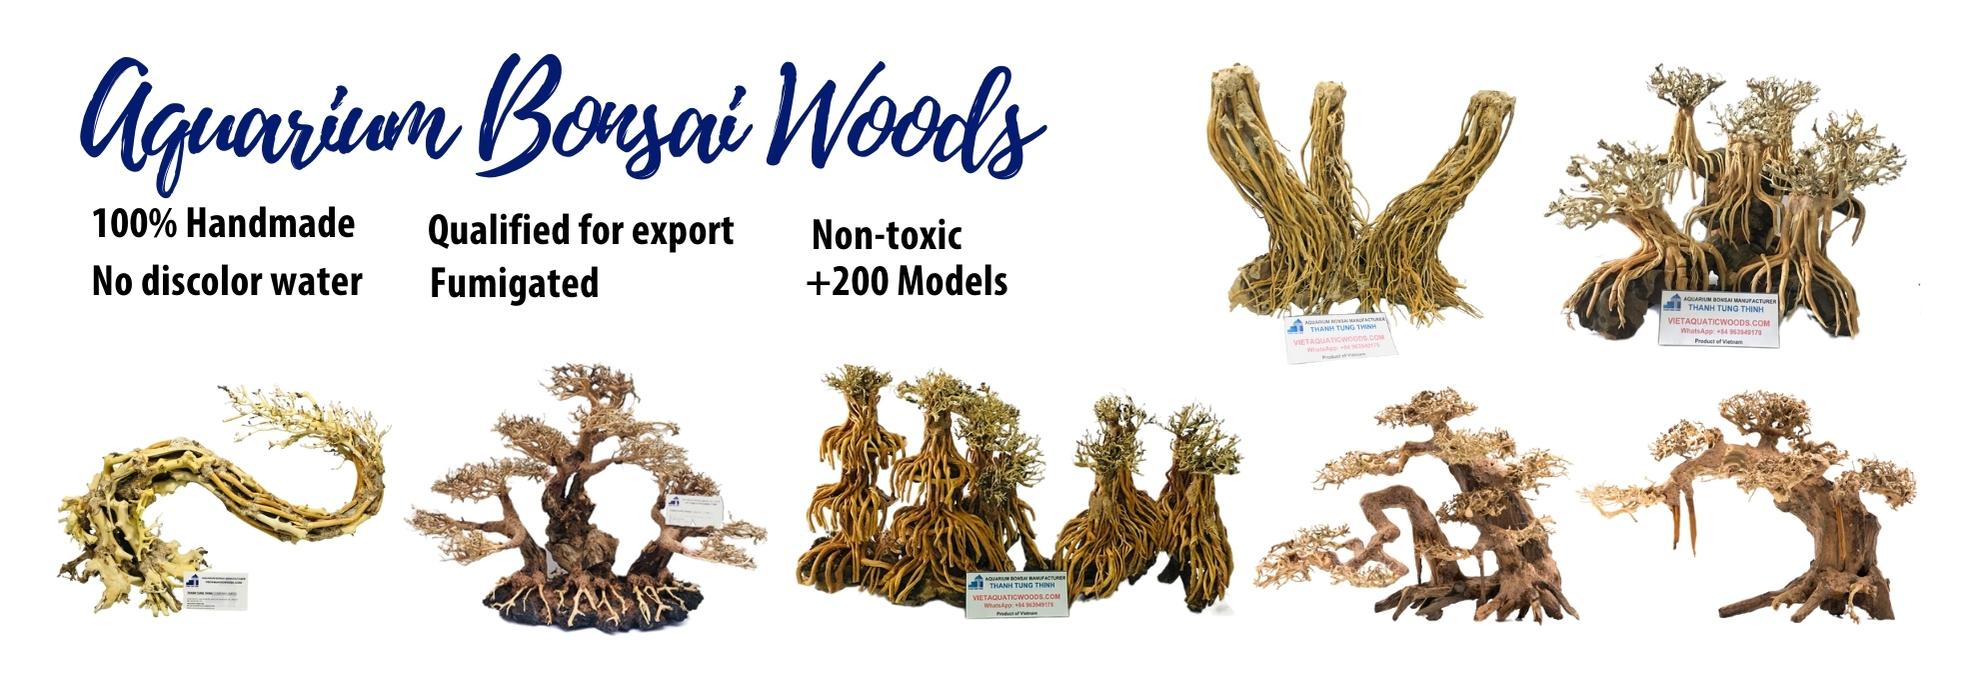 Prestigious and quality source of natural driftwood.  How to import bulk natural diftwood?